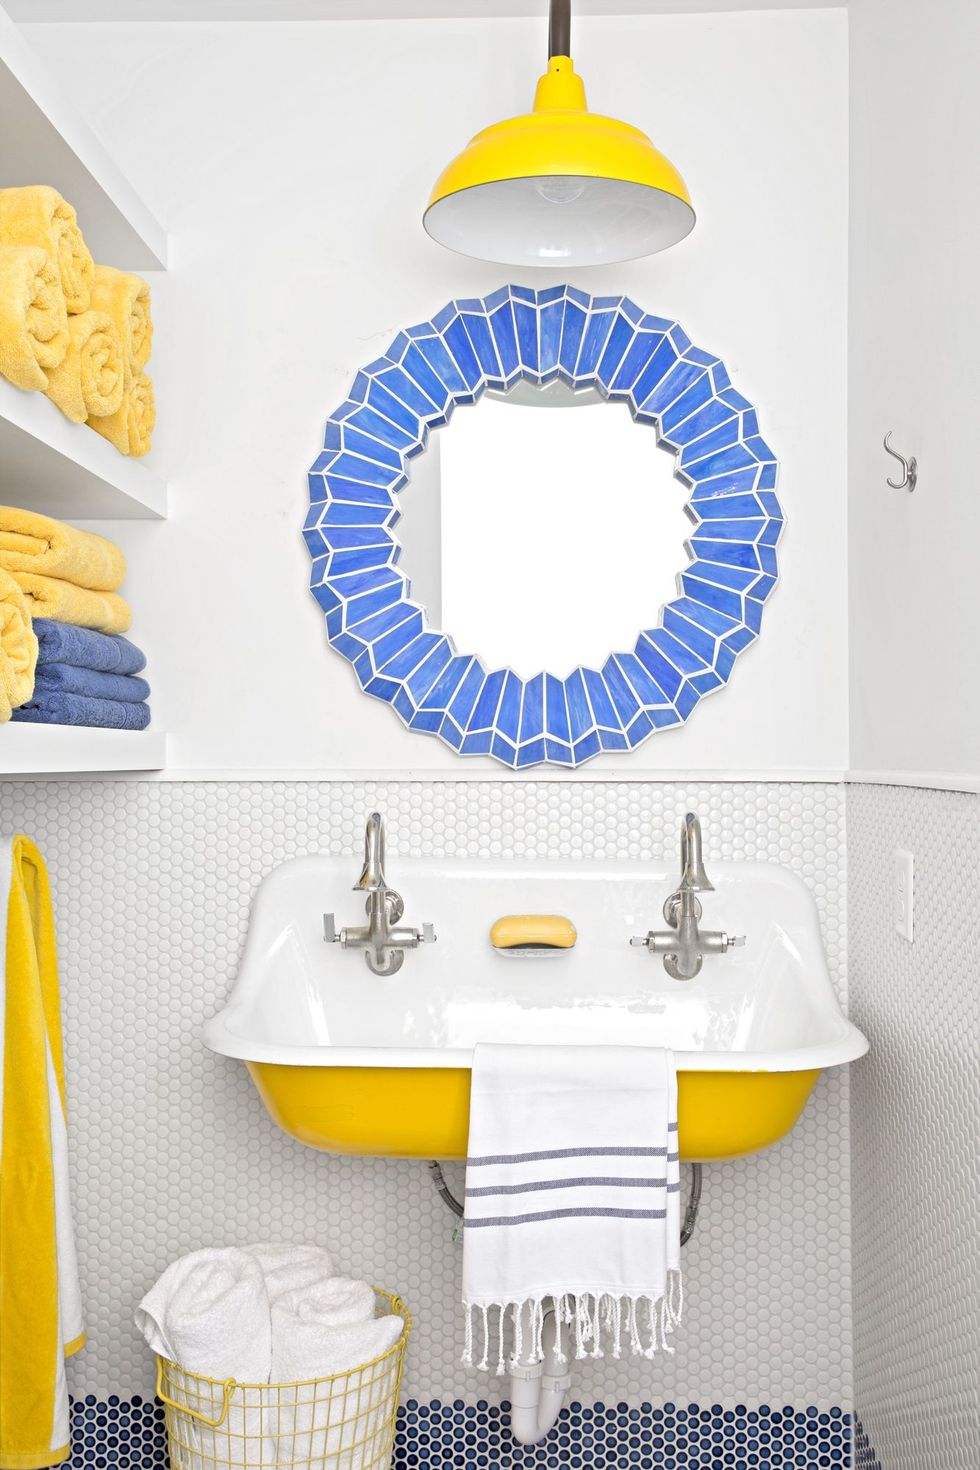 white penny tile lower bathroom wall with band of blue at bottom, yellow vintage sink and pendant light, blue tile mirror